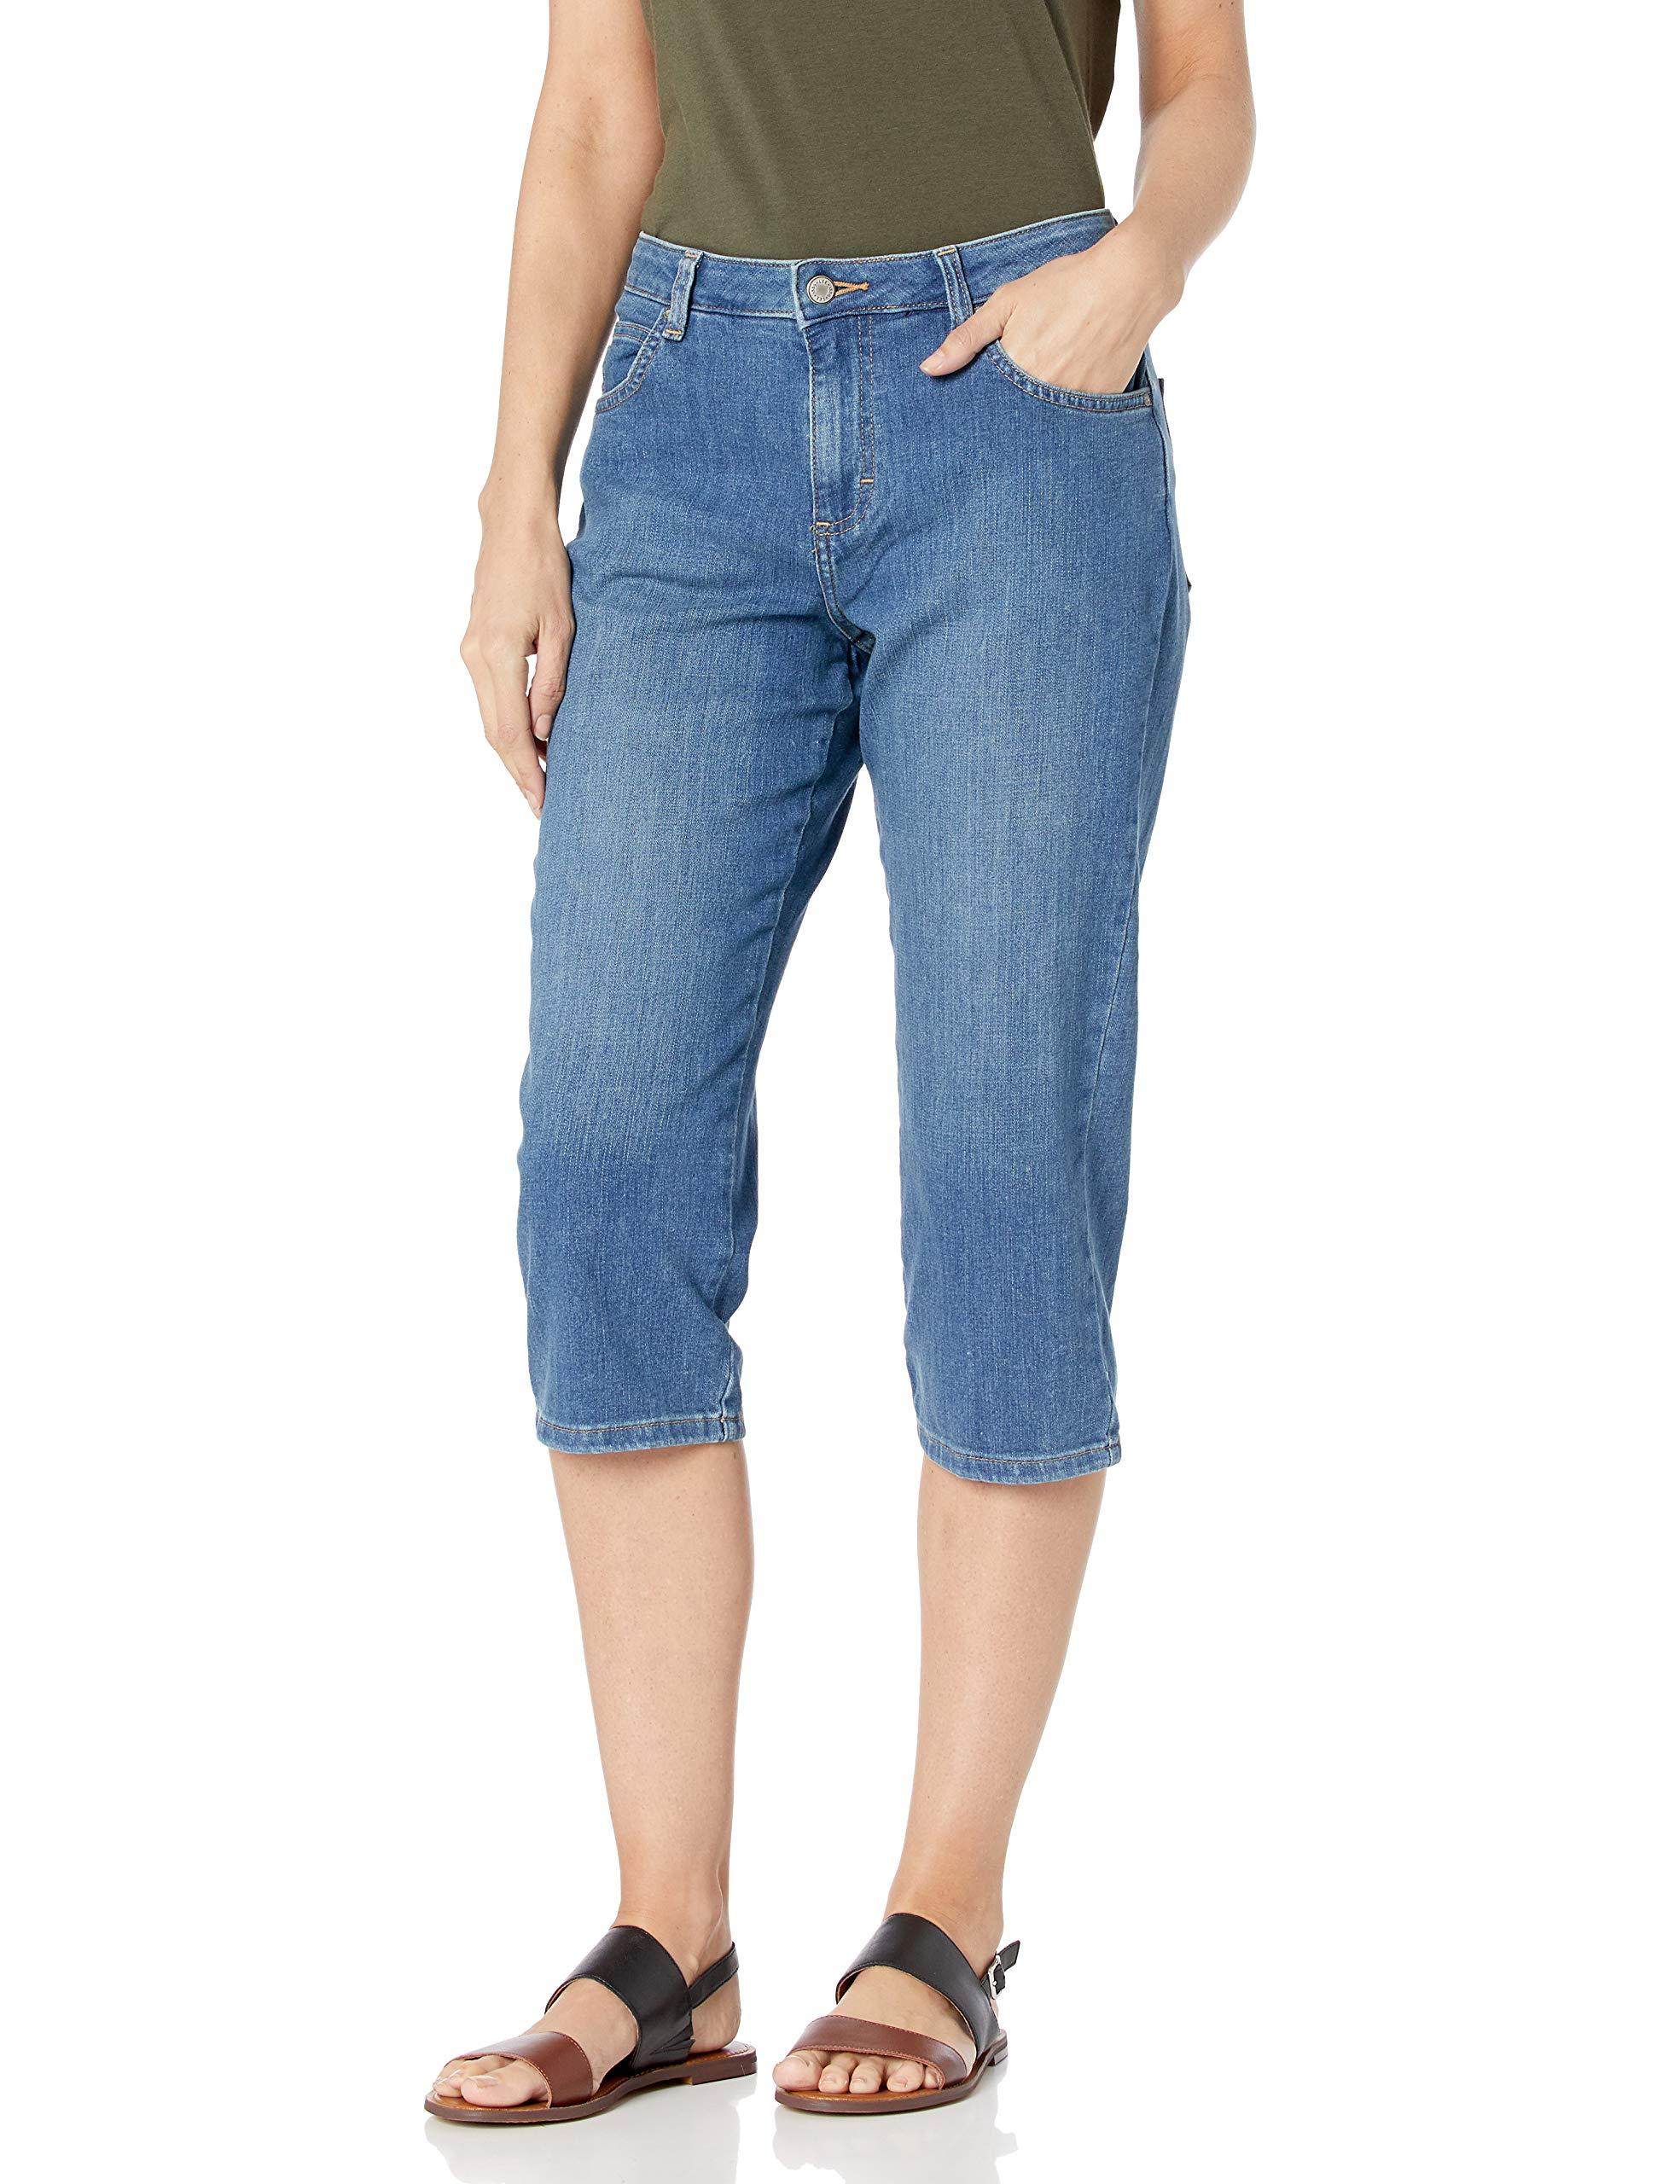 Lee Jeans Denim Relaxed Fit Capri Pant in Blue - Lyst